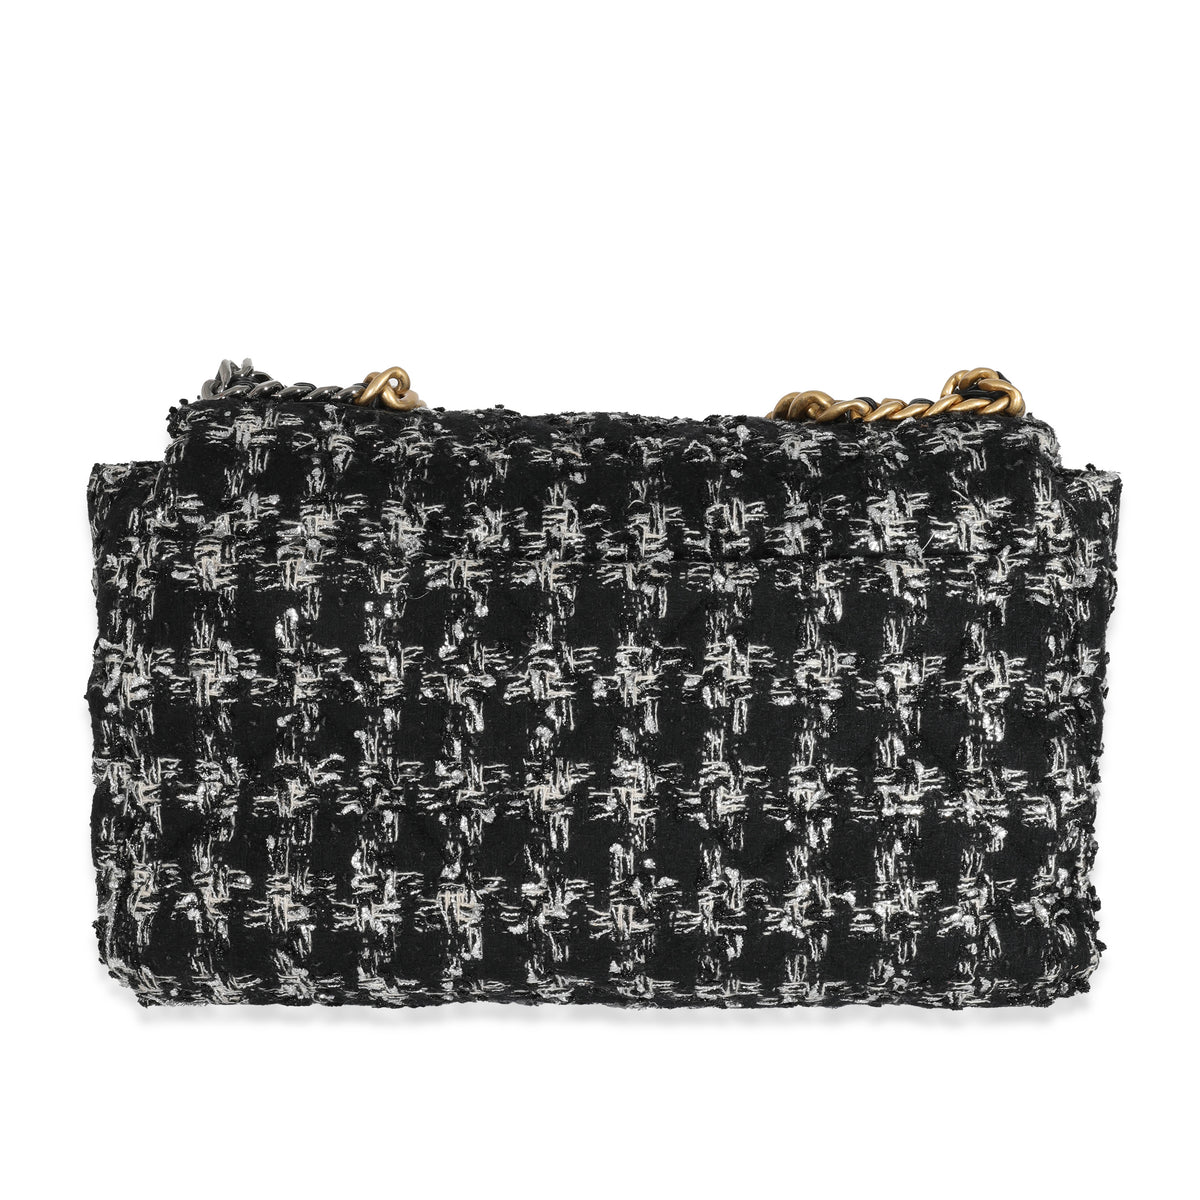 Sell Chanel 19 Maxi Bag in Houndstooth Tweed - Black/Brown